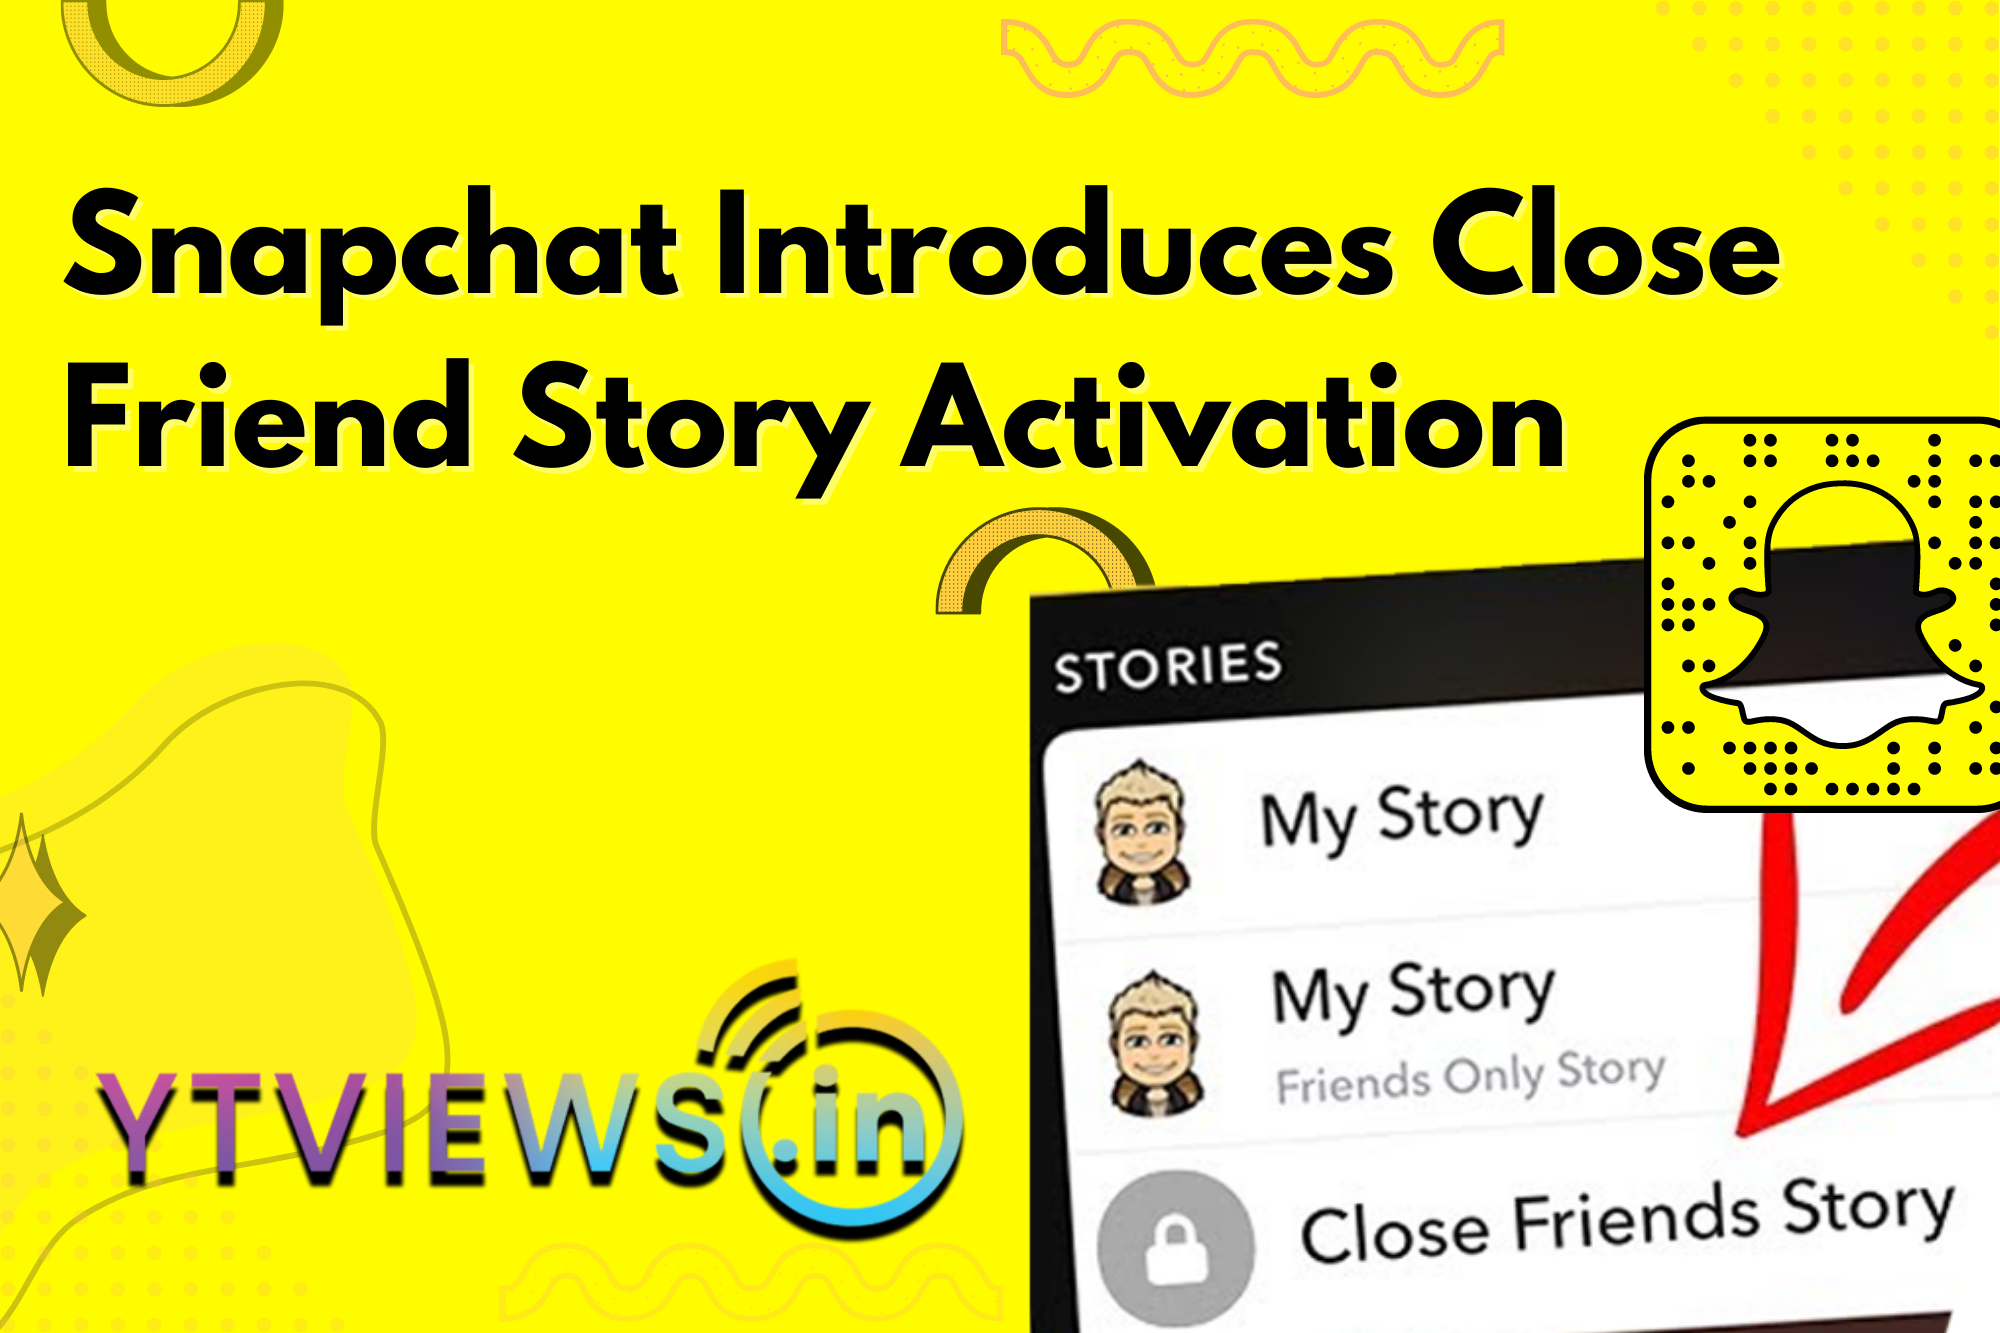 Snapchat Introduces Close Friend Story Activation in Celebration of International Friendship Day